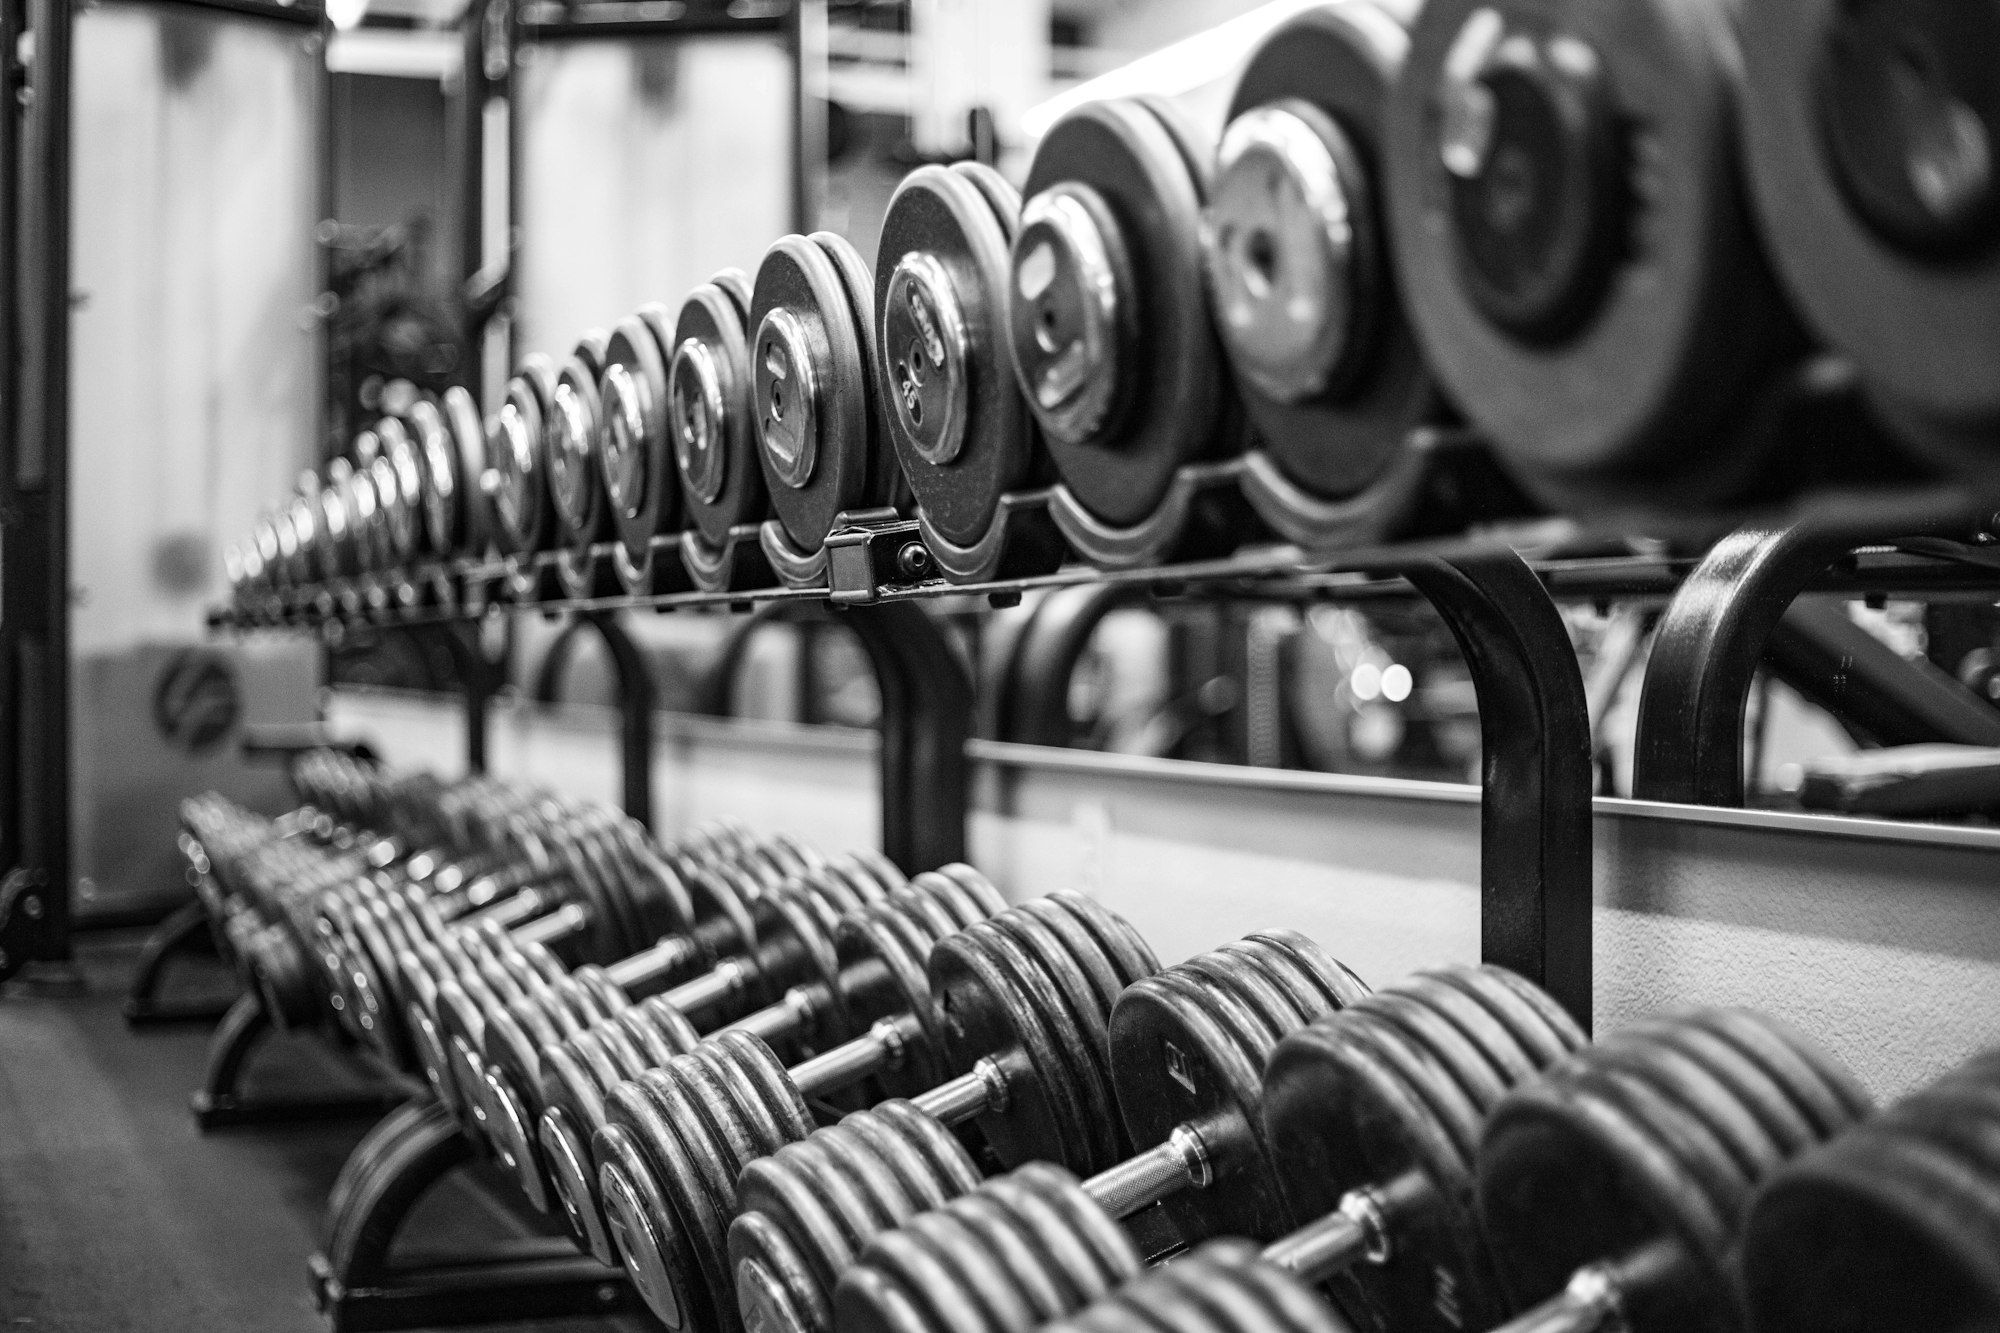 Want to sleep better? Lift some weights.